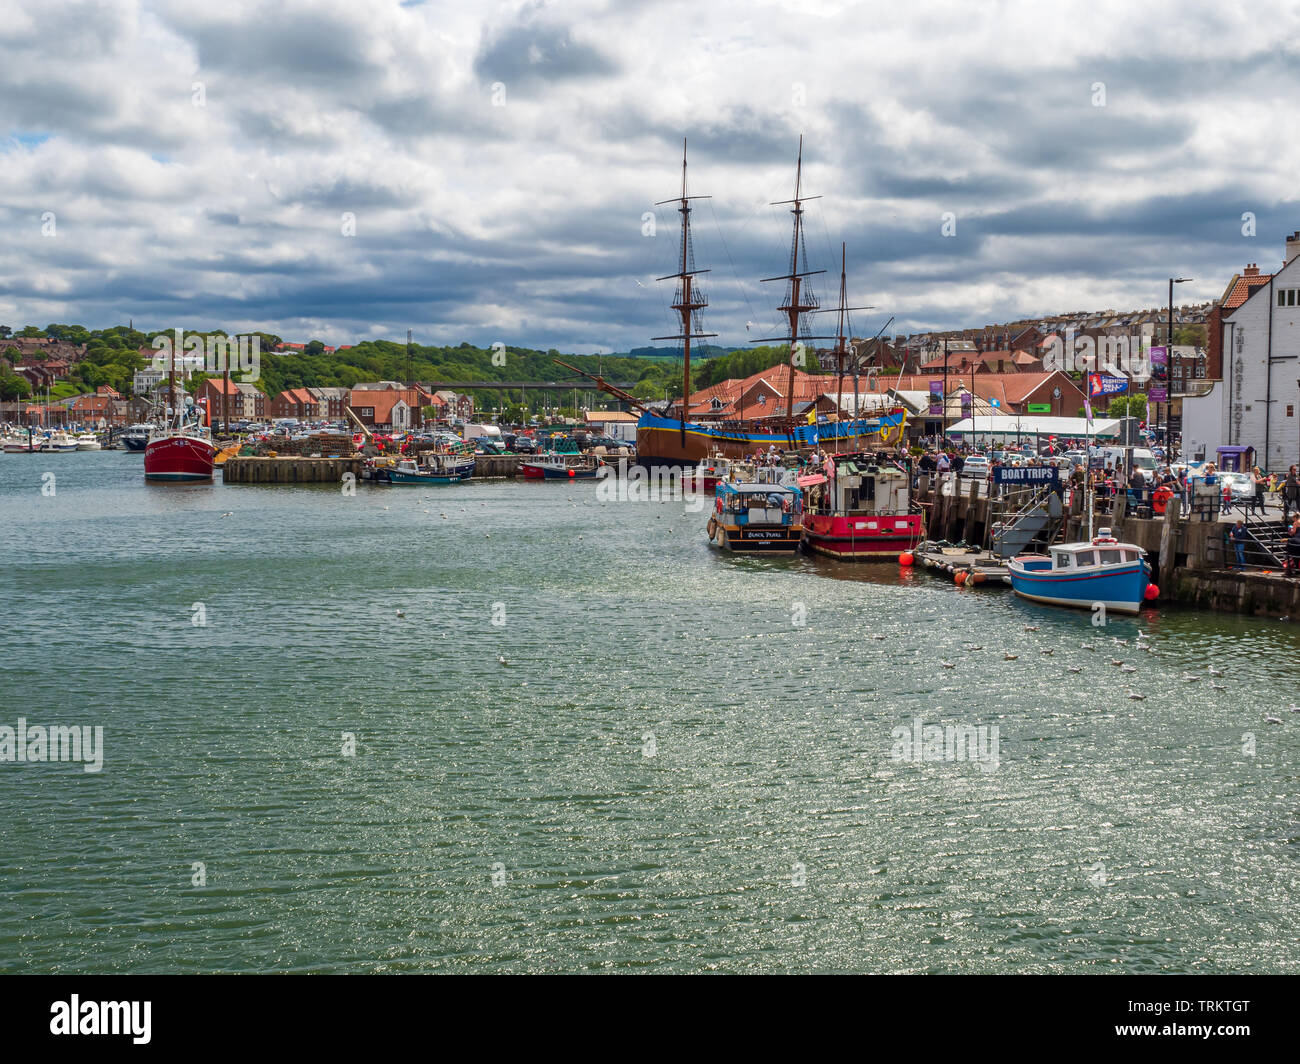 Whitby Harbour with Tall Sailing ship moored alongside modern fishing boats, as well as a tourist destination its also a working fishing port Stock Photo